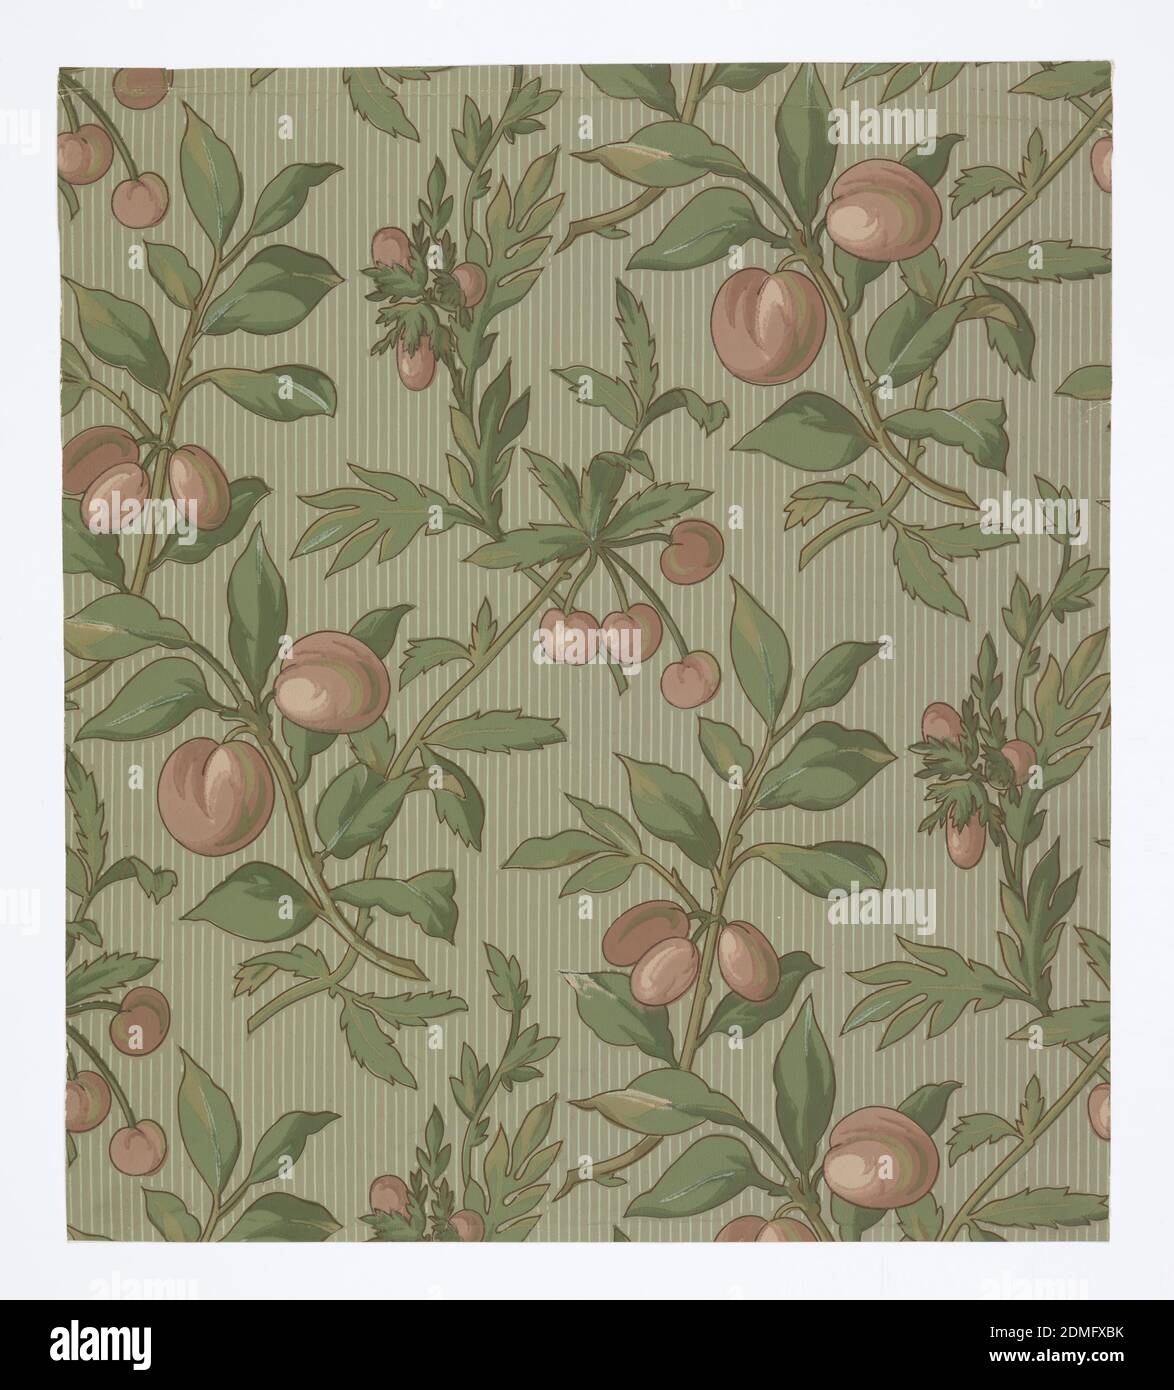 Sidewall, Machine-printed paper, All-over pattern of branches laden with different fruits scattered on a pinstripe ground; single-motif diamond-shaped repeat in off-set columns; fruits are pink and look like cherries, plums, and other pit fruits; naturalistic shading on foliage and fruit; ground is gray with bright green stripes., USA, ca. 1880, Wallcoverings, Sidewall Stock Photo